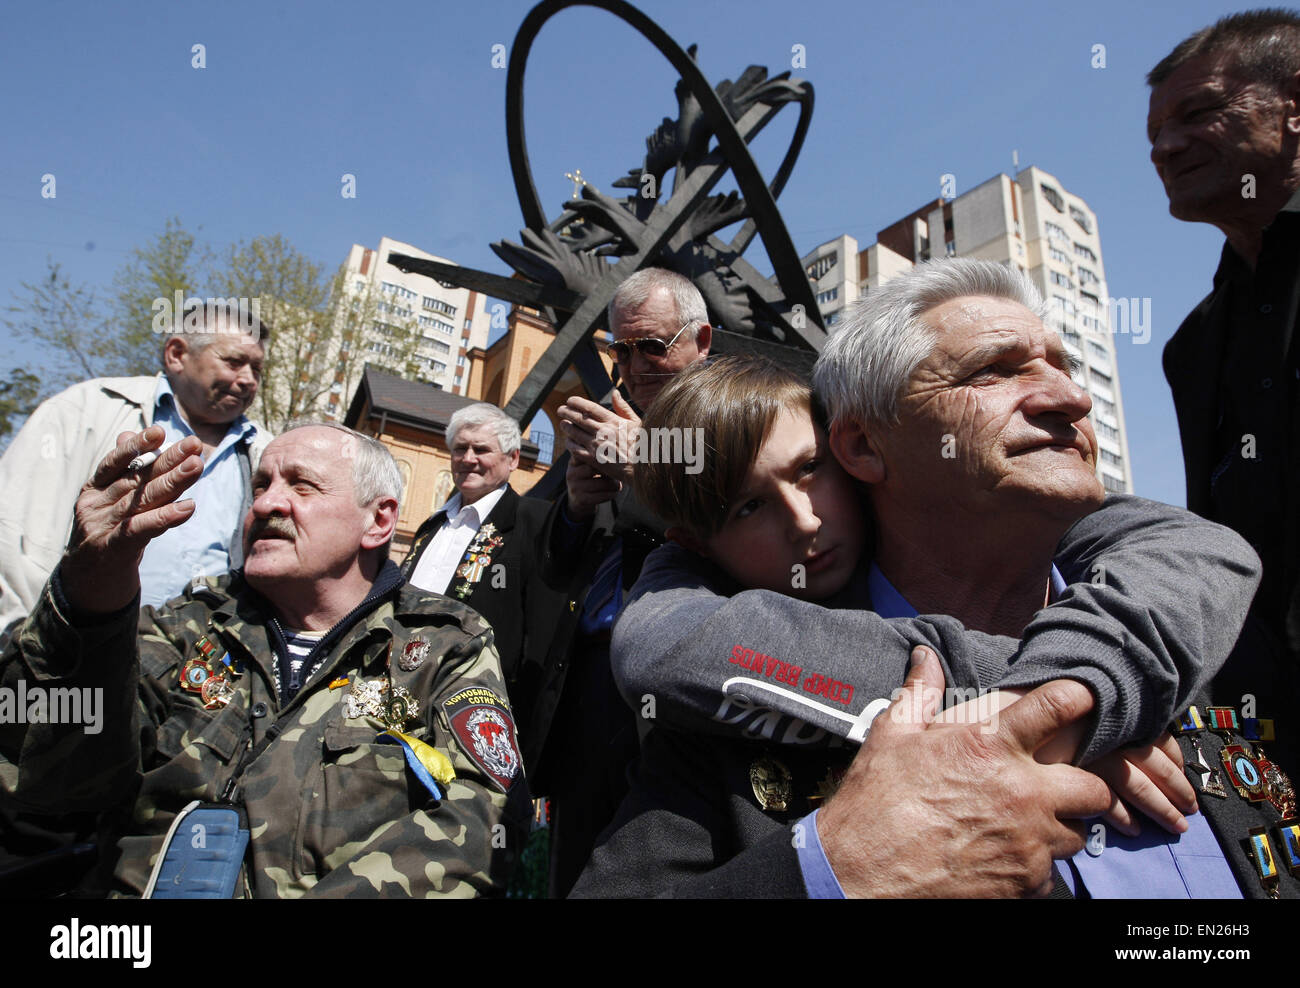 Kiev, Ukraine. 26th Apr, 2015. A former liquidators of the Chernobyl nuclear accident attends a commemoration ceremony at the Chernobyl victims' memorial in the Ukrainian capital of Kiev on April 26, 2015. The world marks the 29th anniversary of the world's worst nuclear disaster at Chernobyl nuclear pant in Ukraine. The explosion at reactor number four of the Chernobyl power plant in the early hours of April 26, 1986 sent radioactive fallout into the atmosphere that spread from the Soviet Union across Europe. © Serg Glovny/ZUMA Wire/ZUMAPRESS.com/Alamy Live News Stock Photo